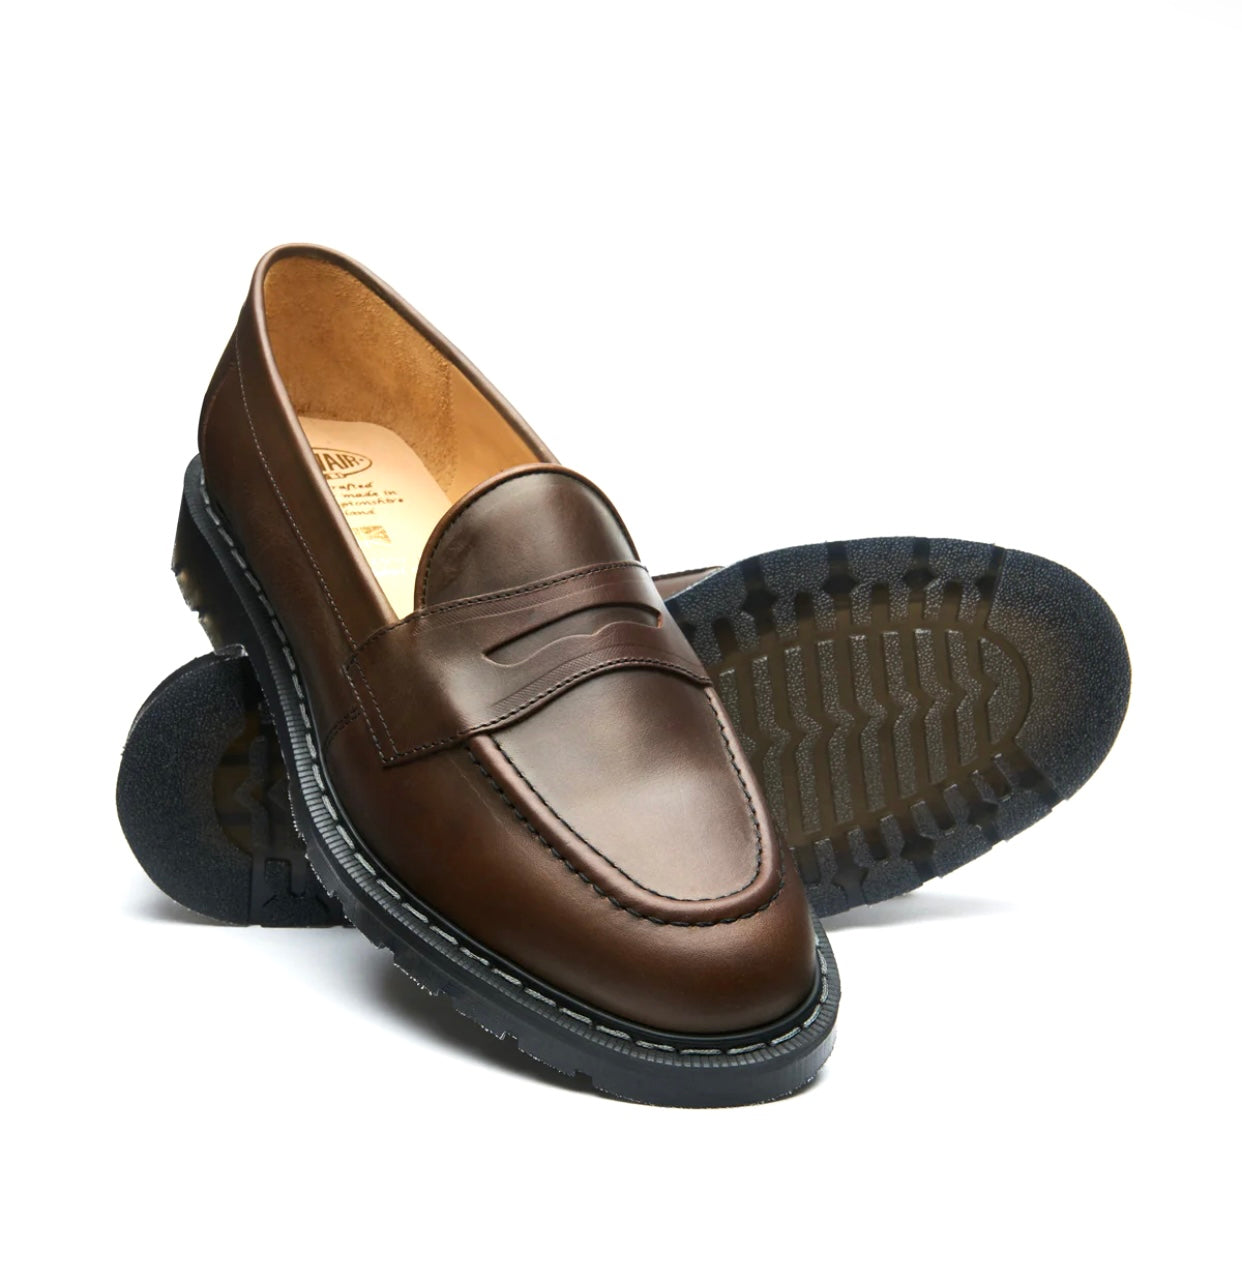 Solovair Penny Loafer Crazy Horse Brown Leather Shoe Made In England